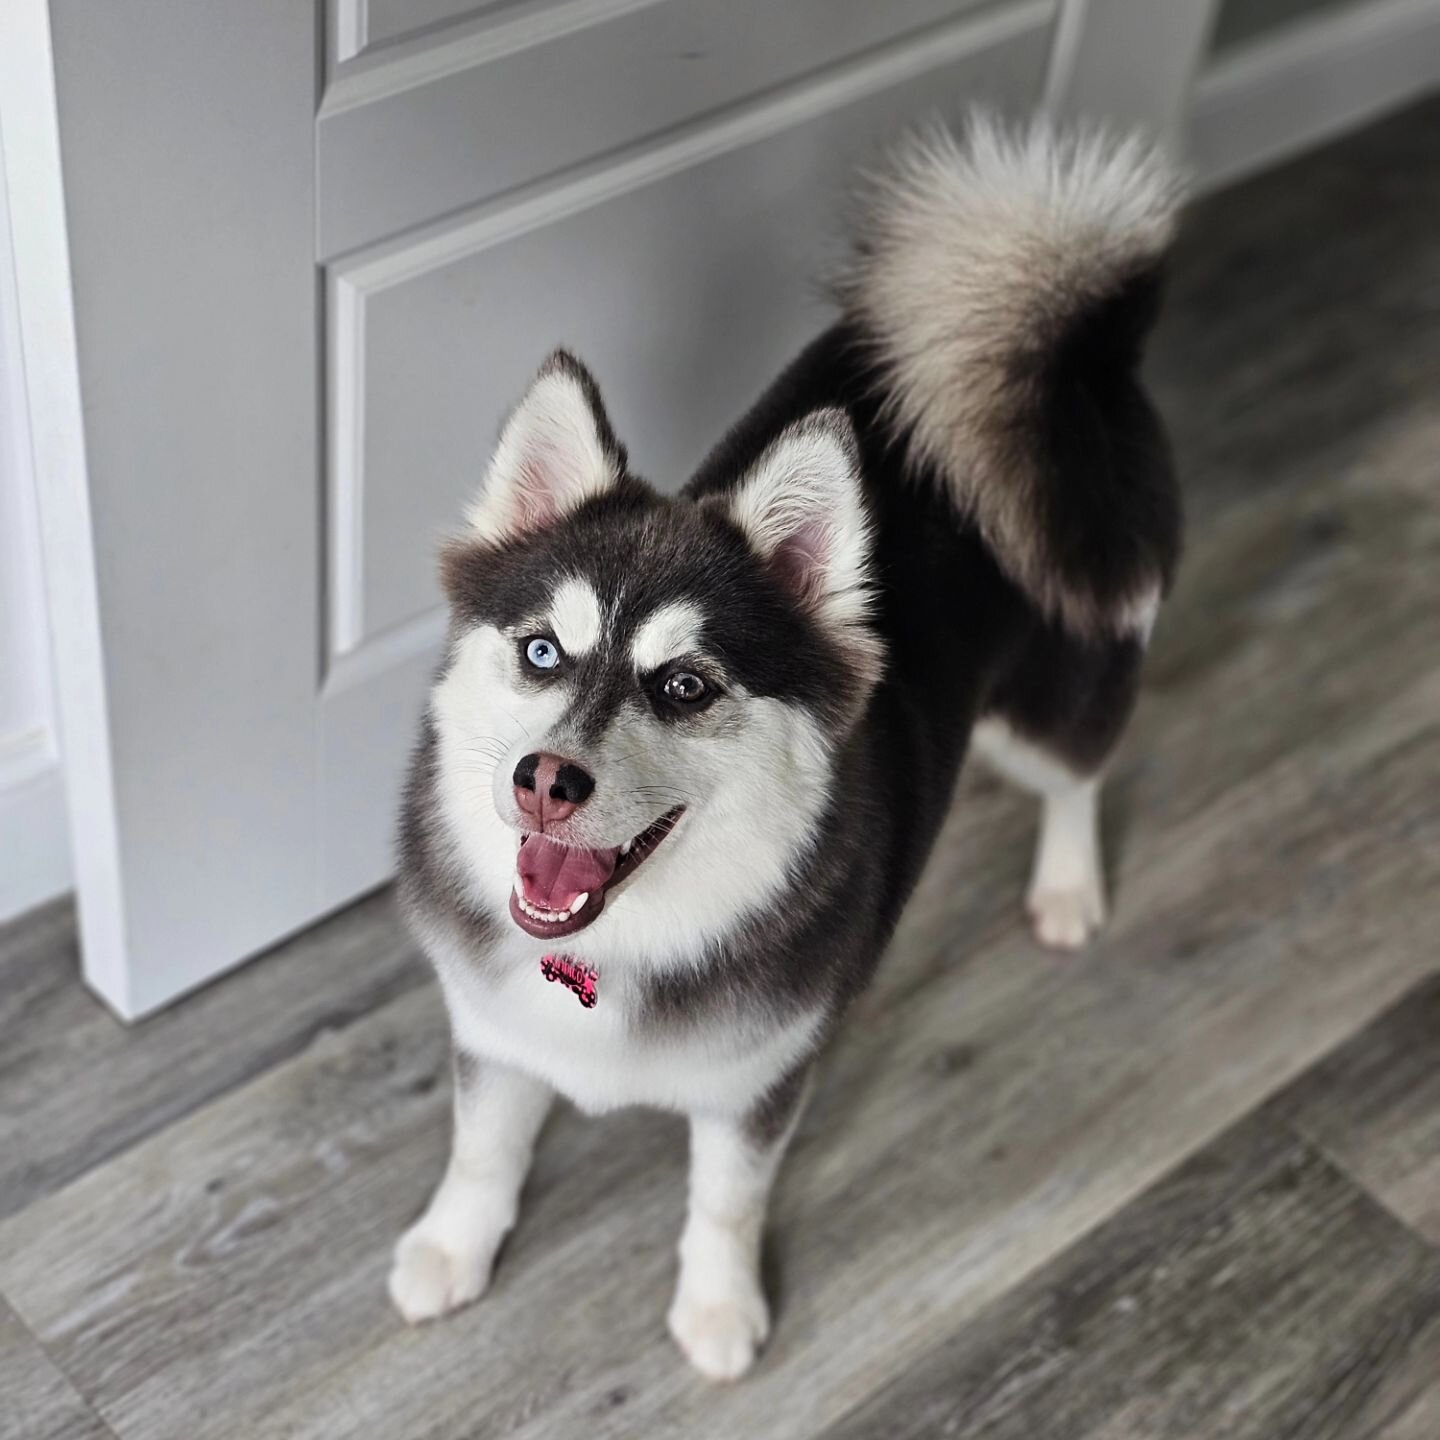 💫 So fresh &amp; So clean 💫

A trip to the groomers this morning for Indy while she's losing her puppy coat, look at that gorgeous floofy tail! Thanks to @pawshighpeak 

Swipe for the fun pics 😂

▪️
❤ Www.PrestigePomskies.com ❤
▪️

#pomsky #husky 